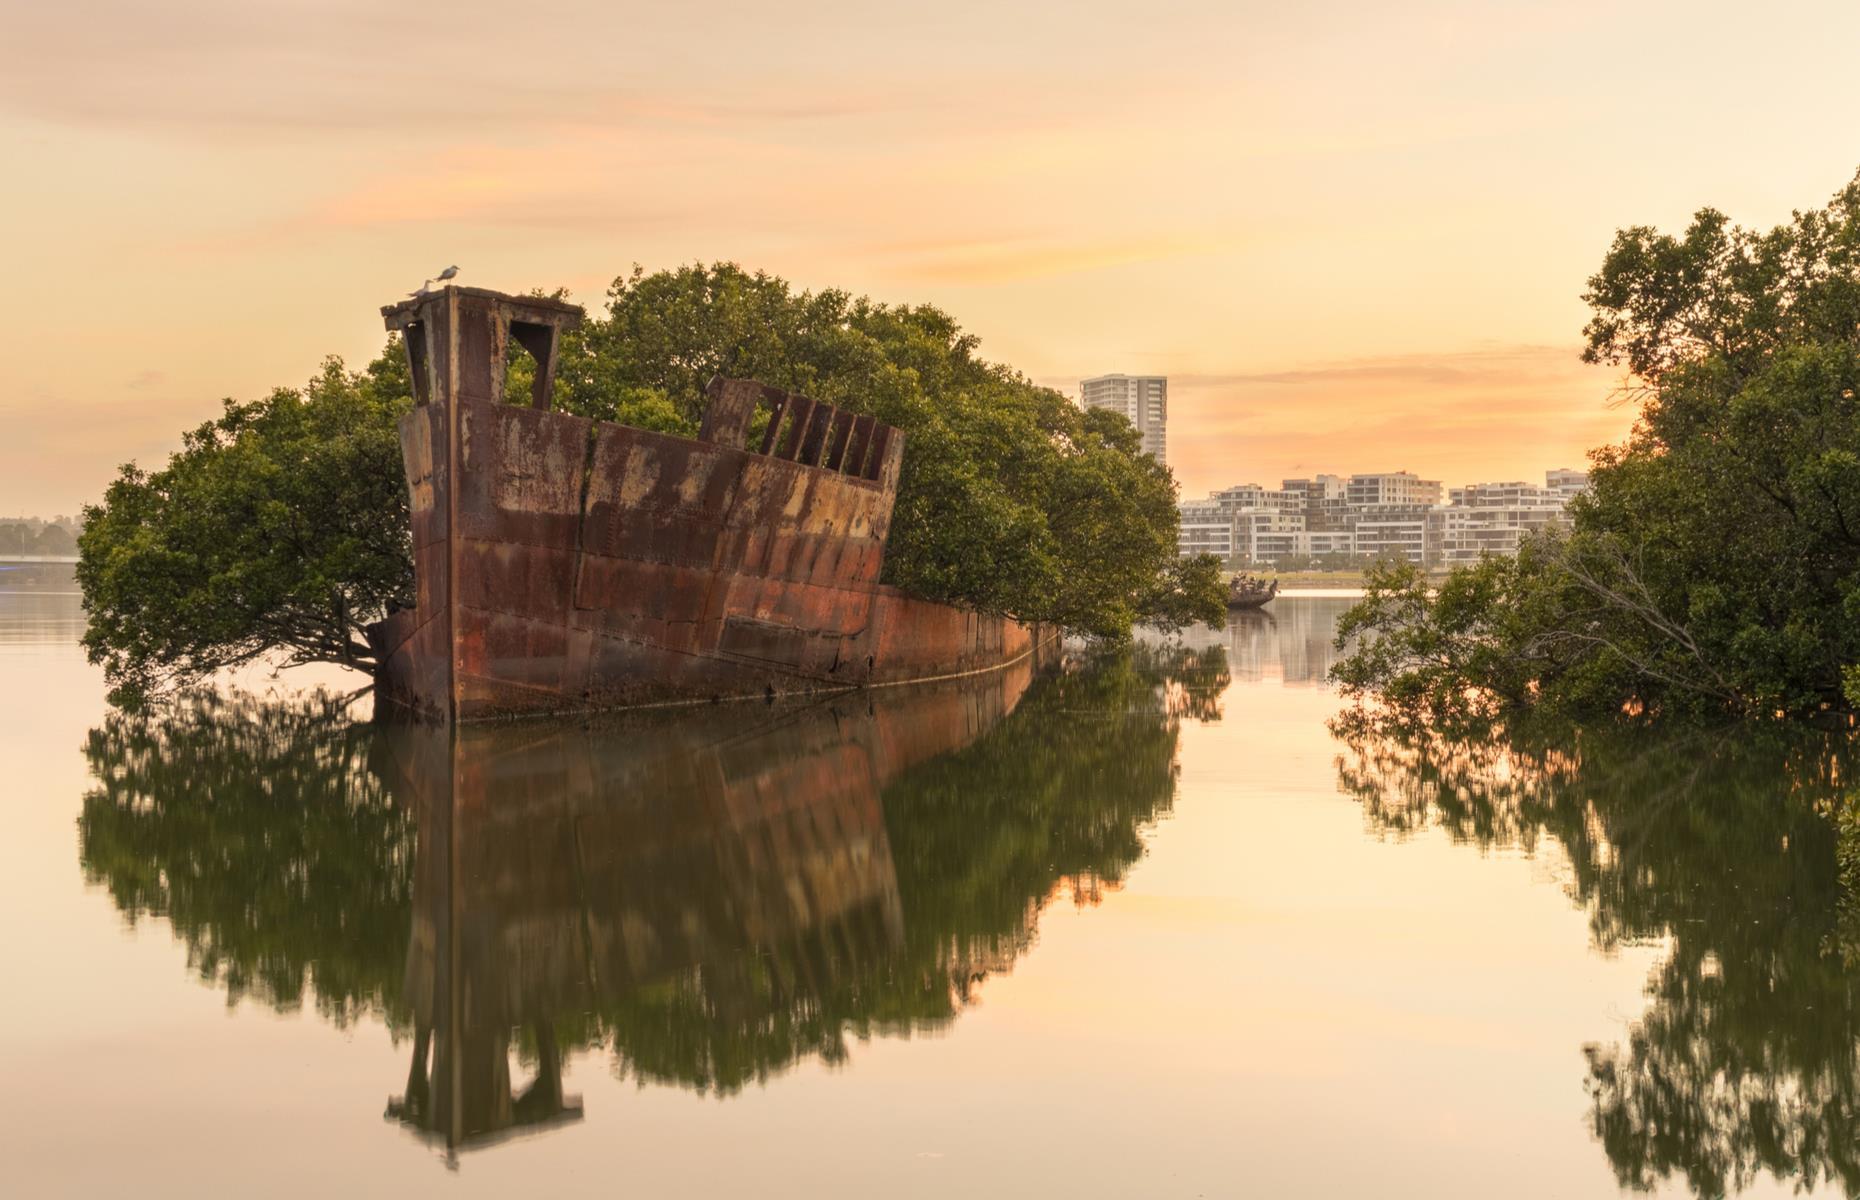 <p>Built in the UK in 1911 and once a working cargo ship, the SS Ayrfield is now a rusting wreck completely overgrown by mangroves. Visible from land in western Sydney, it’s one of several abandoned freighters in Homebush Bay, which were decommissioned and left to molder in the shipwreck yard. The others include HMAS Karangi, SS Heroic, and SS Mortlake Bank. To see them, follow the walking track from the Badu Mangroves to the Waterbird Refuge and on to the southern tip of Wentworth Point.</p>